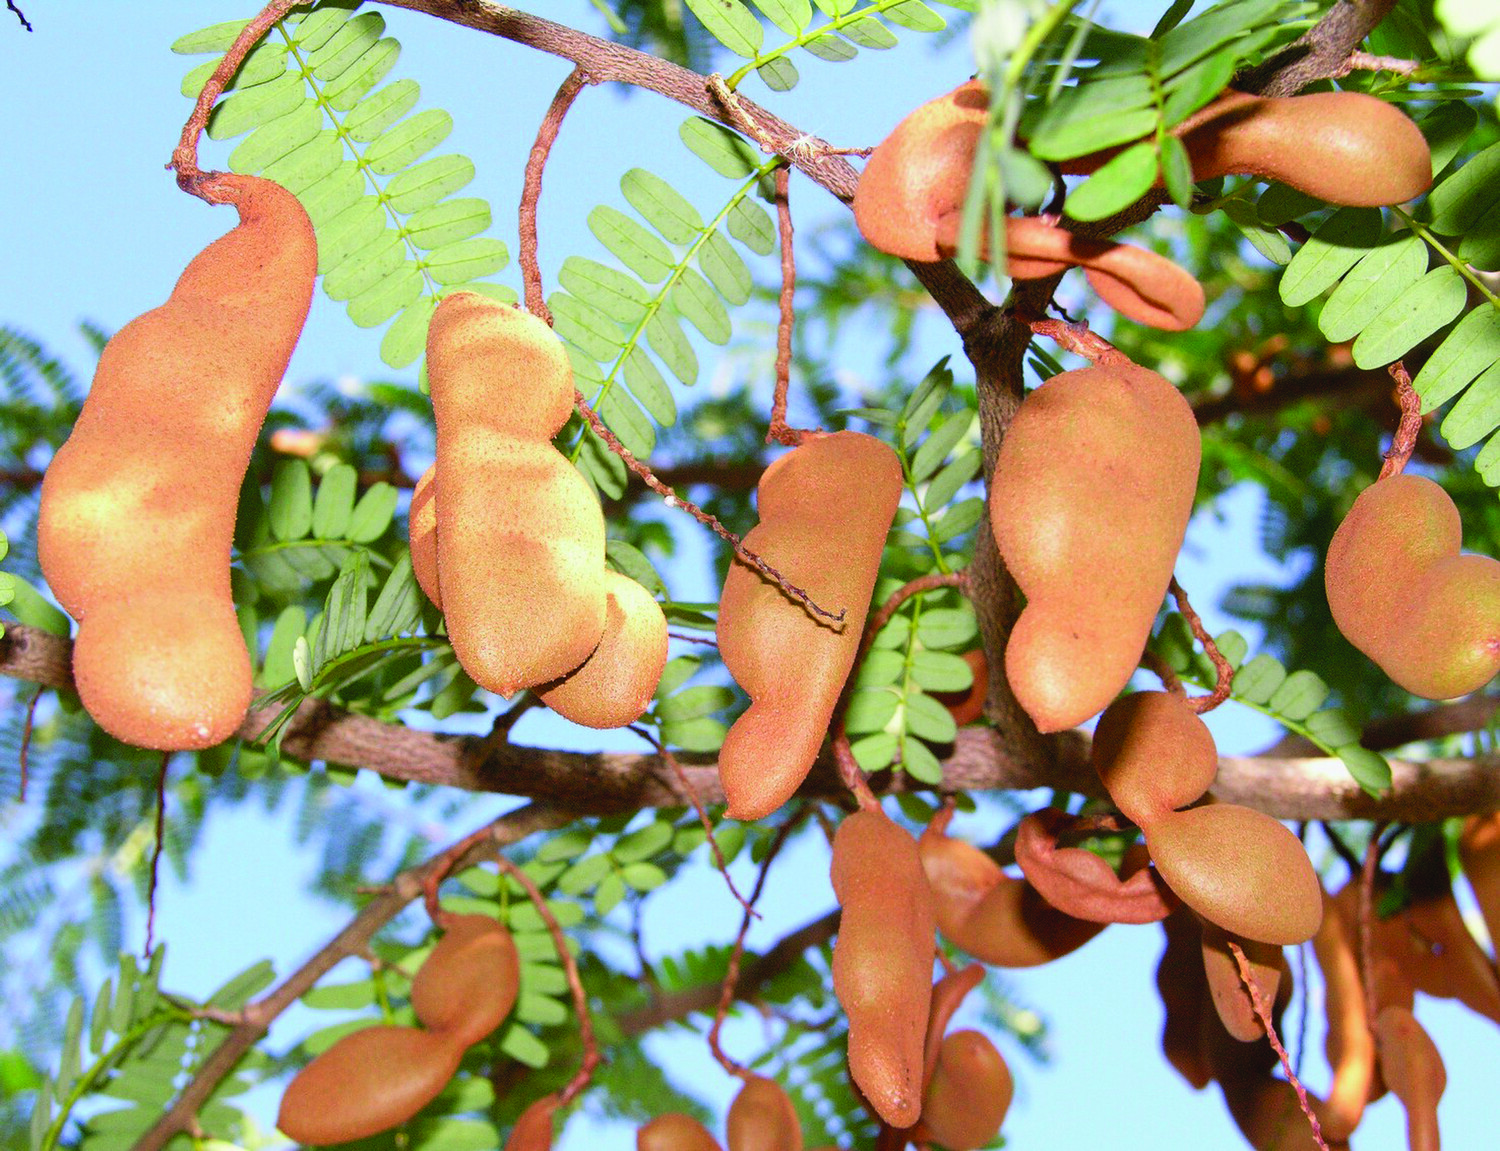 The tamarind still remains one of the lesser known tropical fruit trees in Florida.